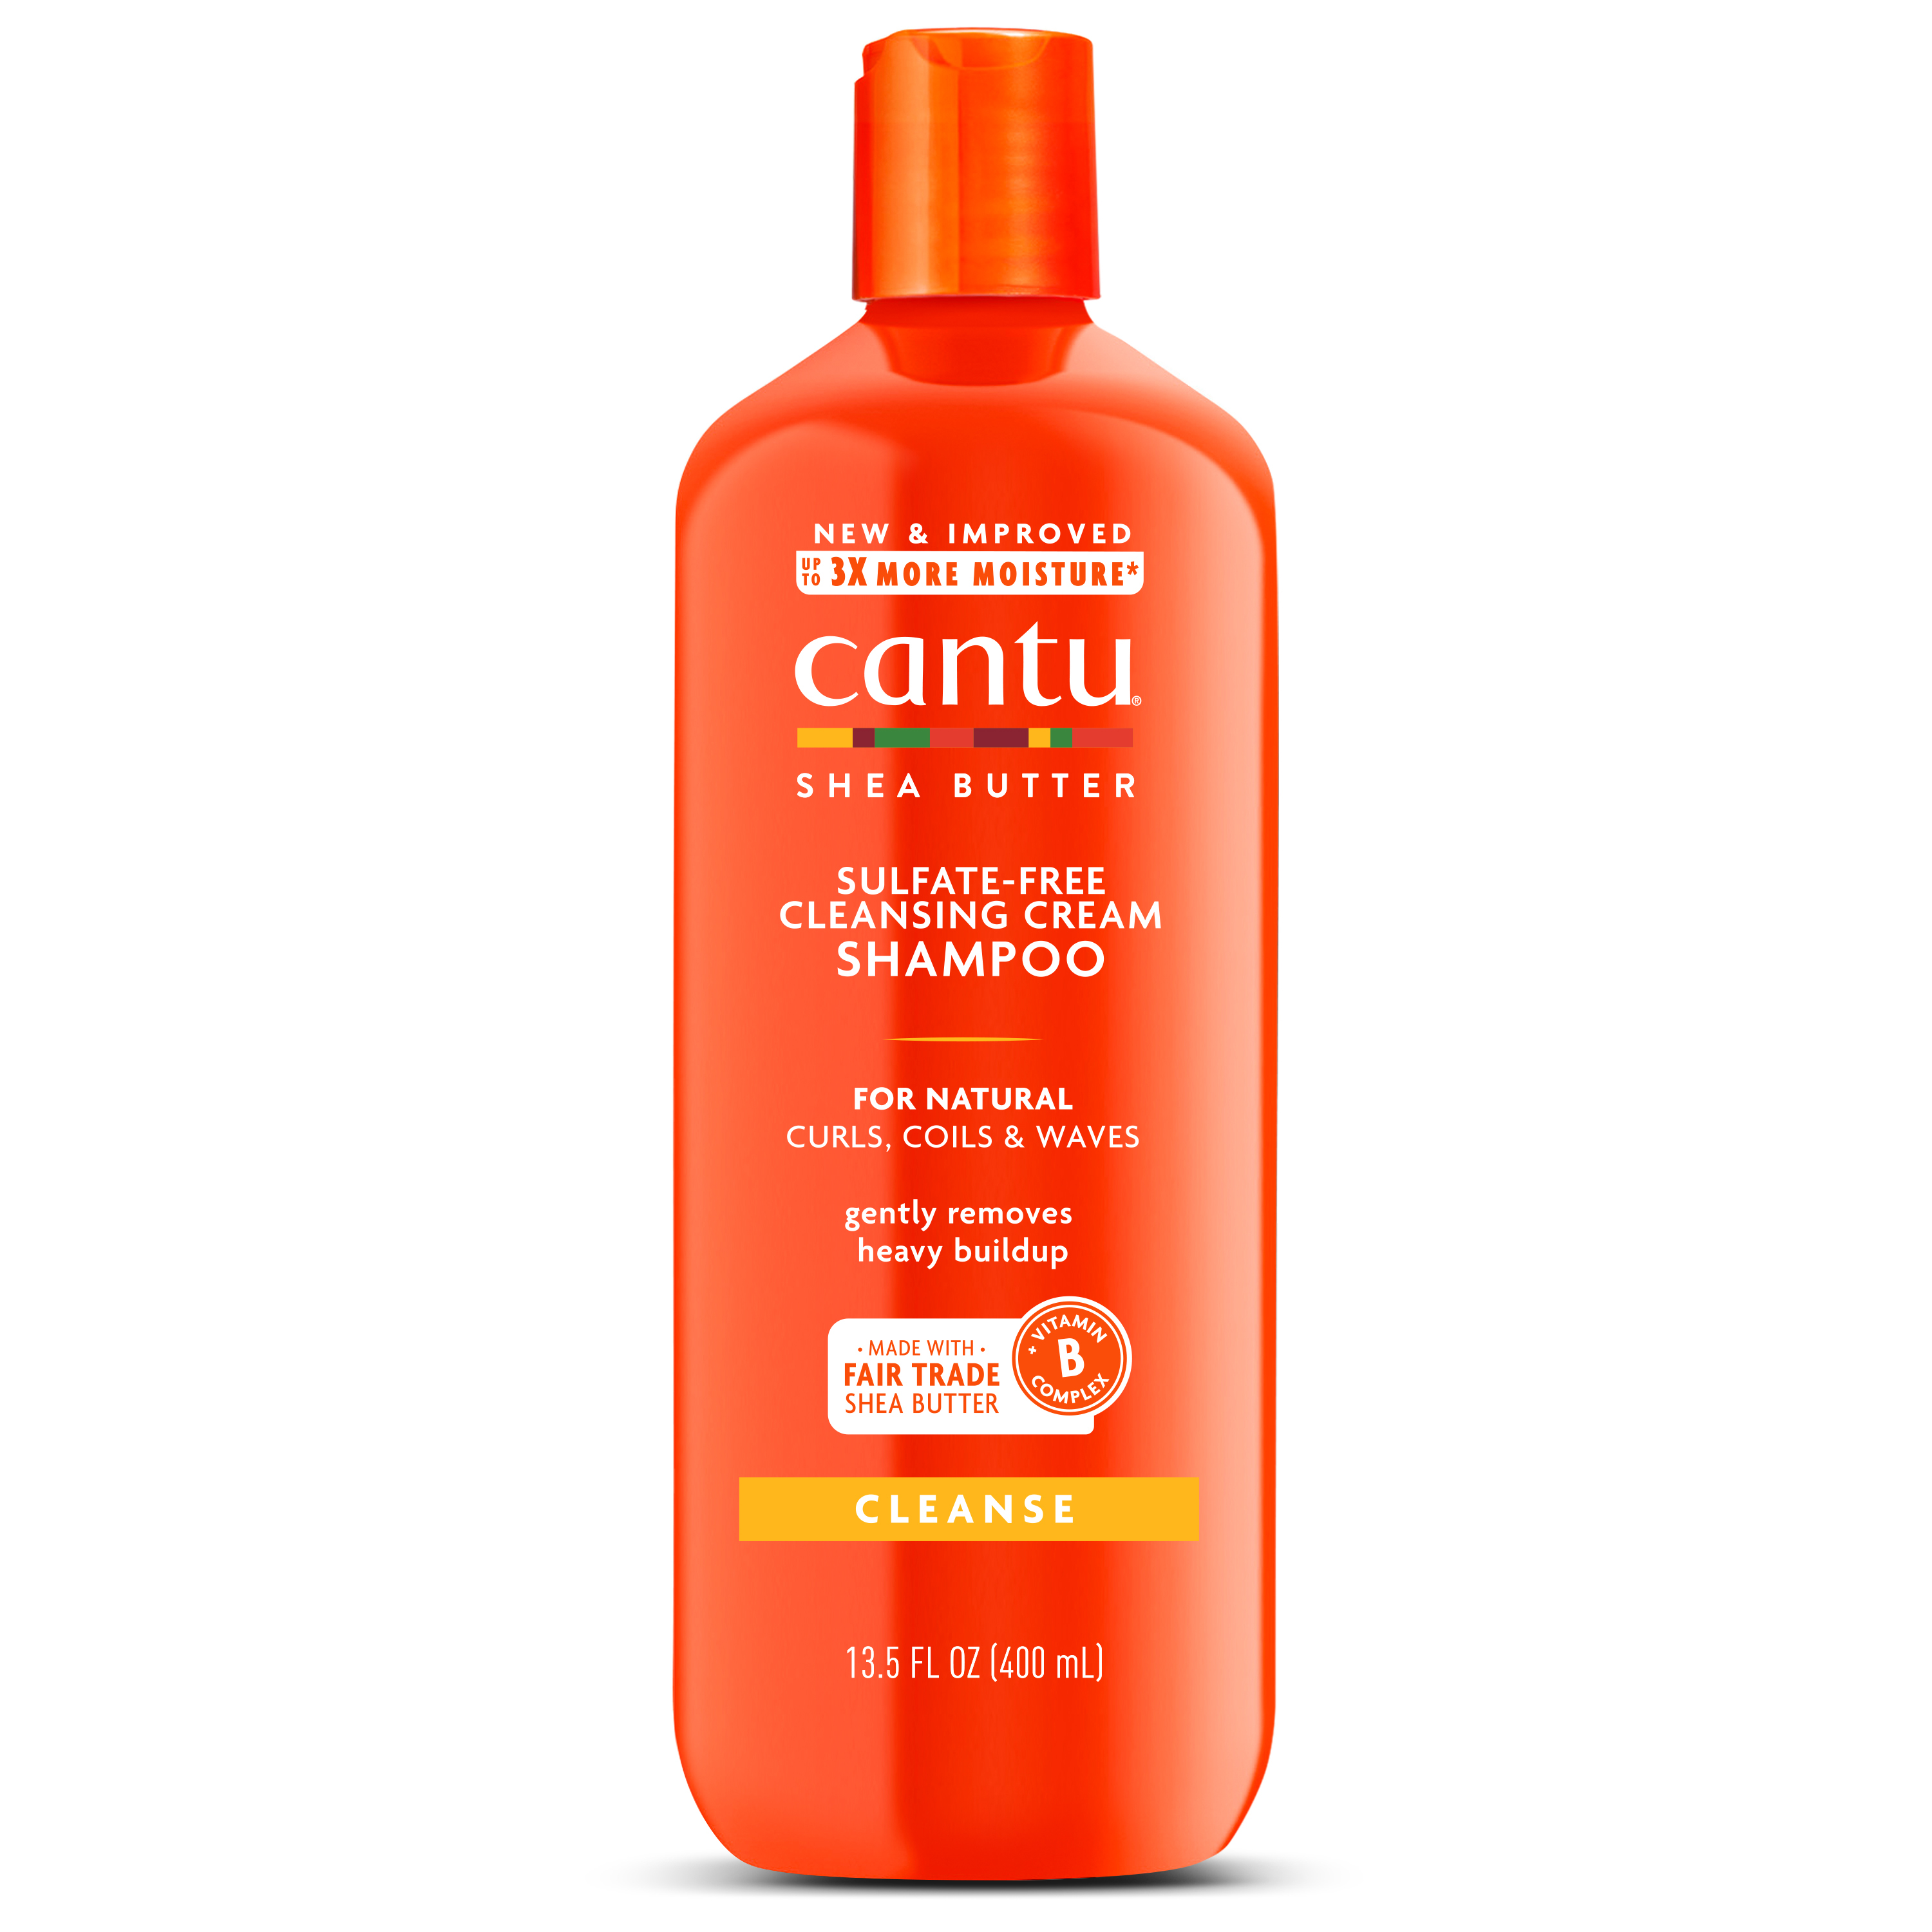 Cantu Sulfate-Free Cleansing Cream Shampoo with Shea Butter for Natural Hair, 13.5 oz - image 1 of 7